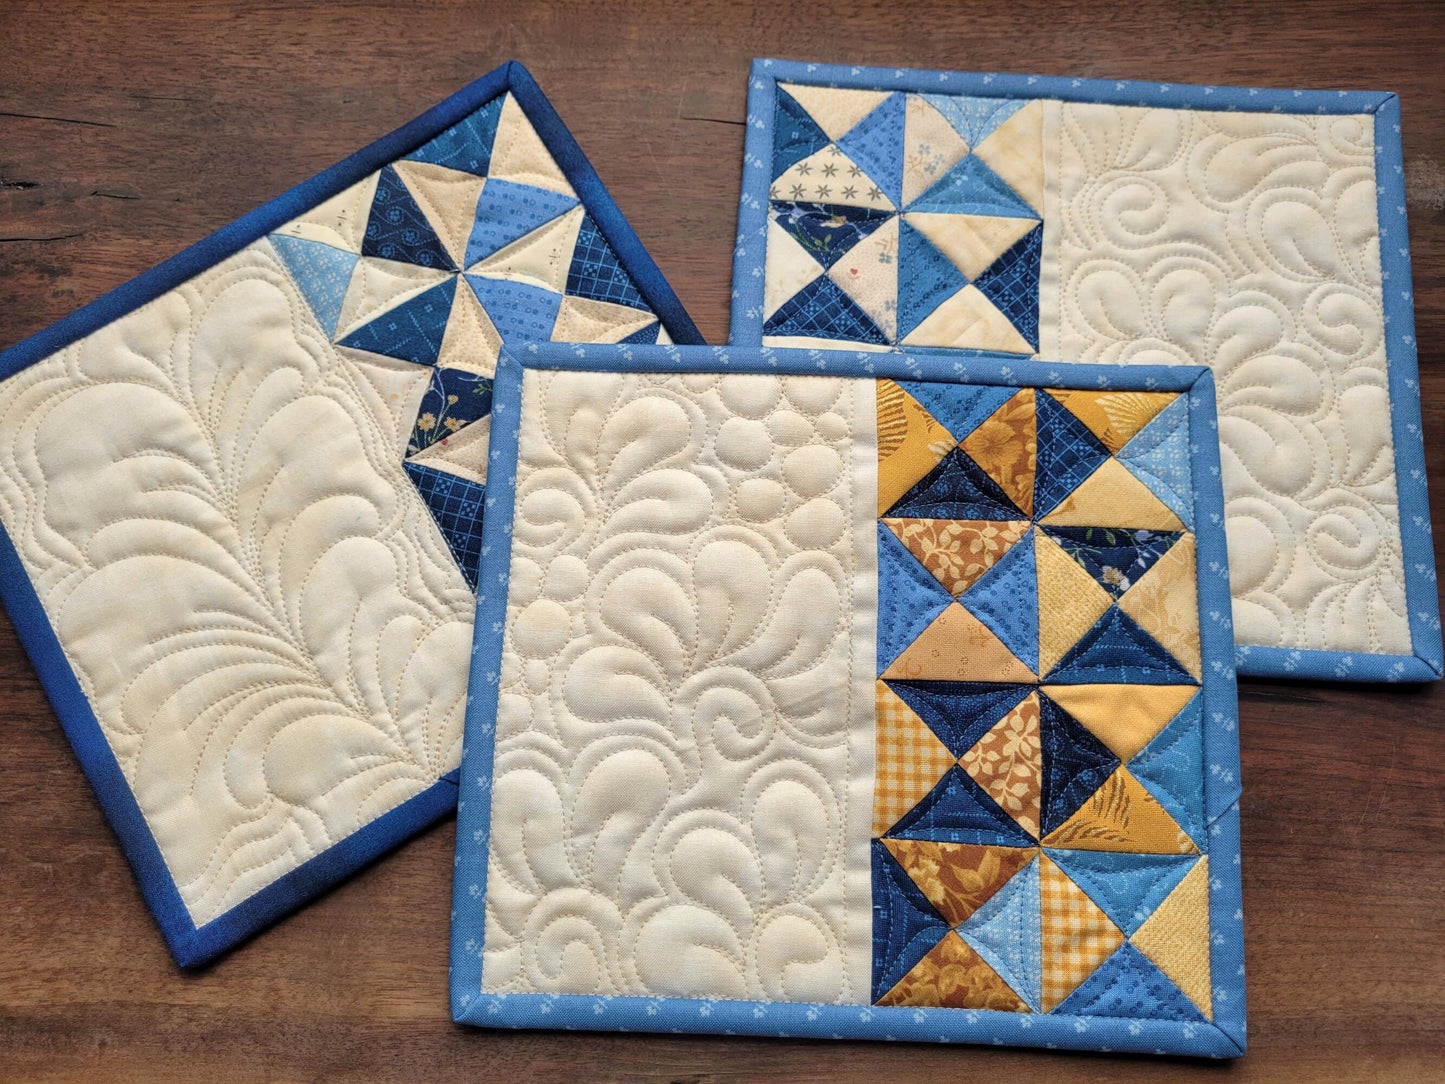 quilted mug rugs, three coordinating patchwork desk coasters can be purchased singly or as a set 